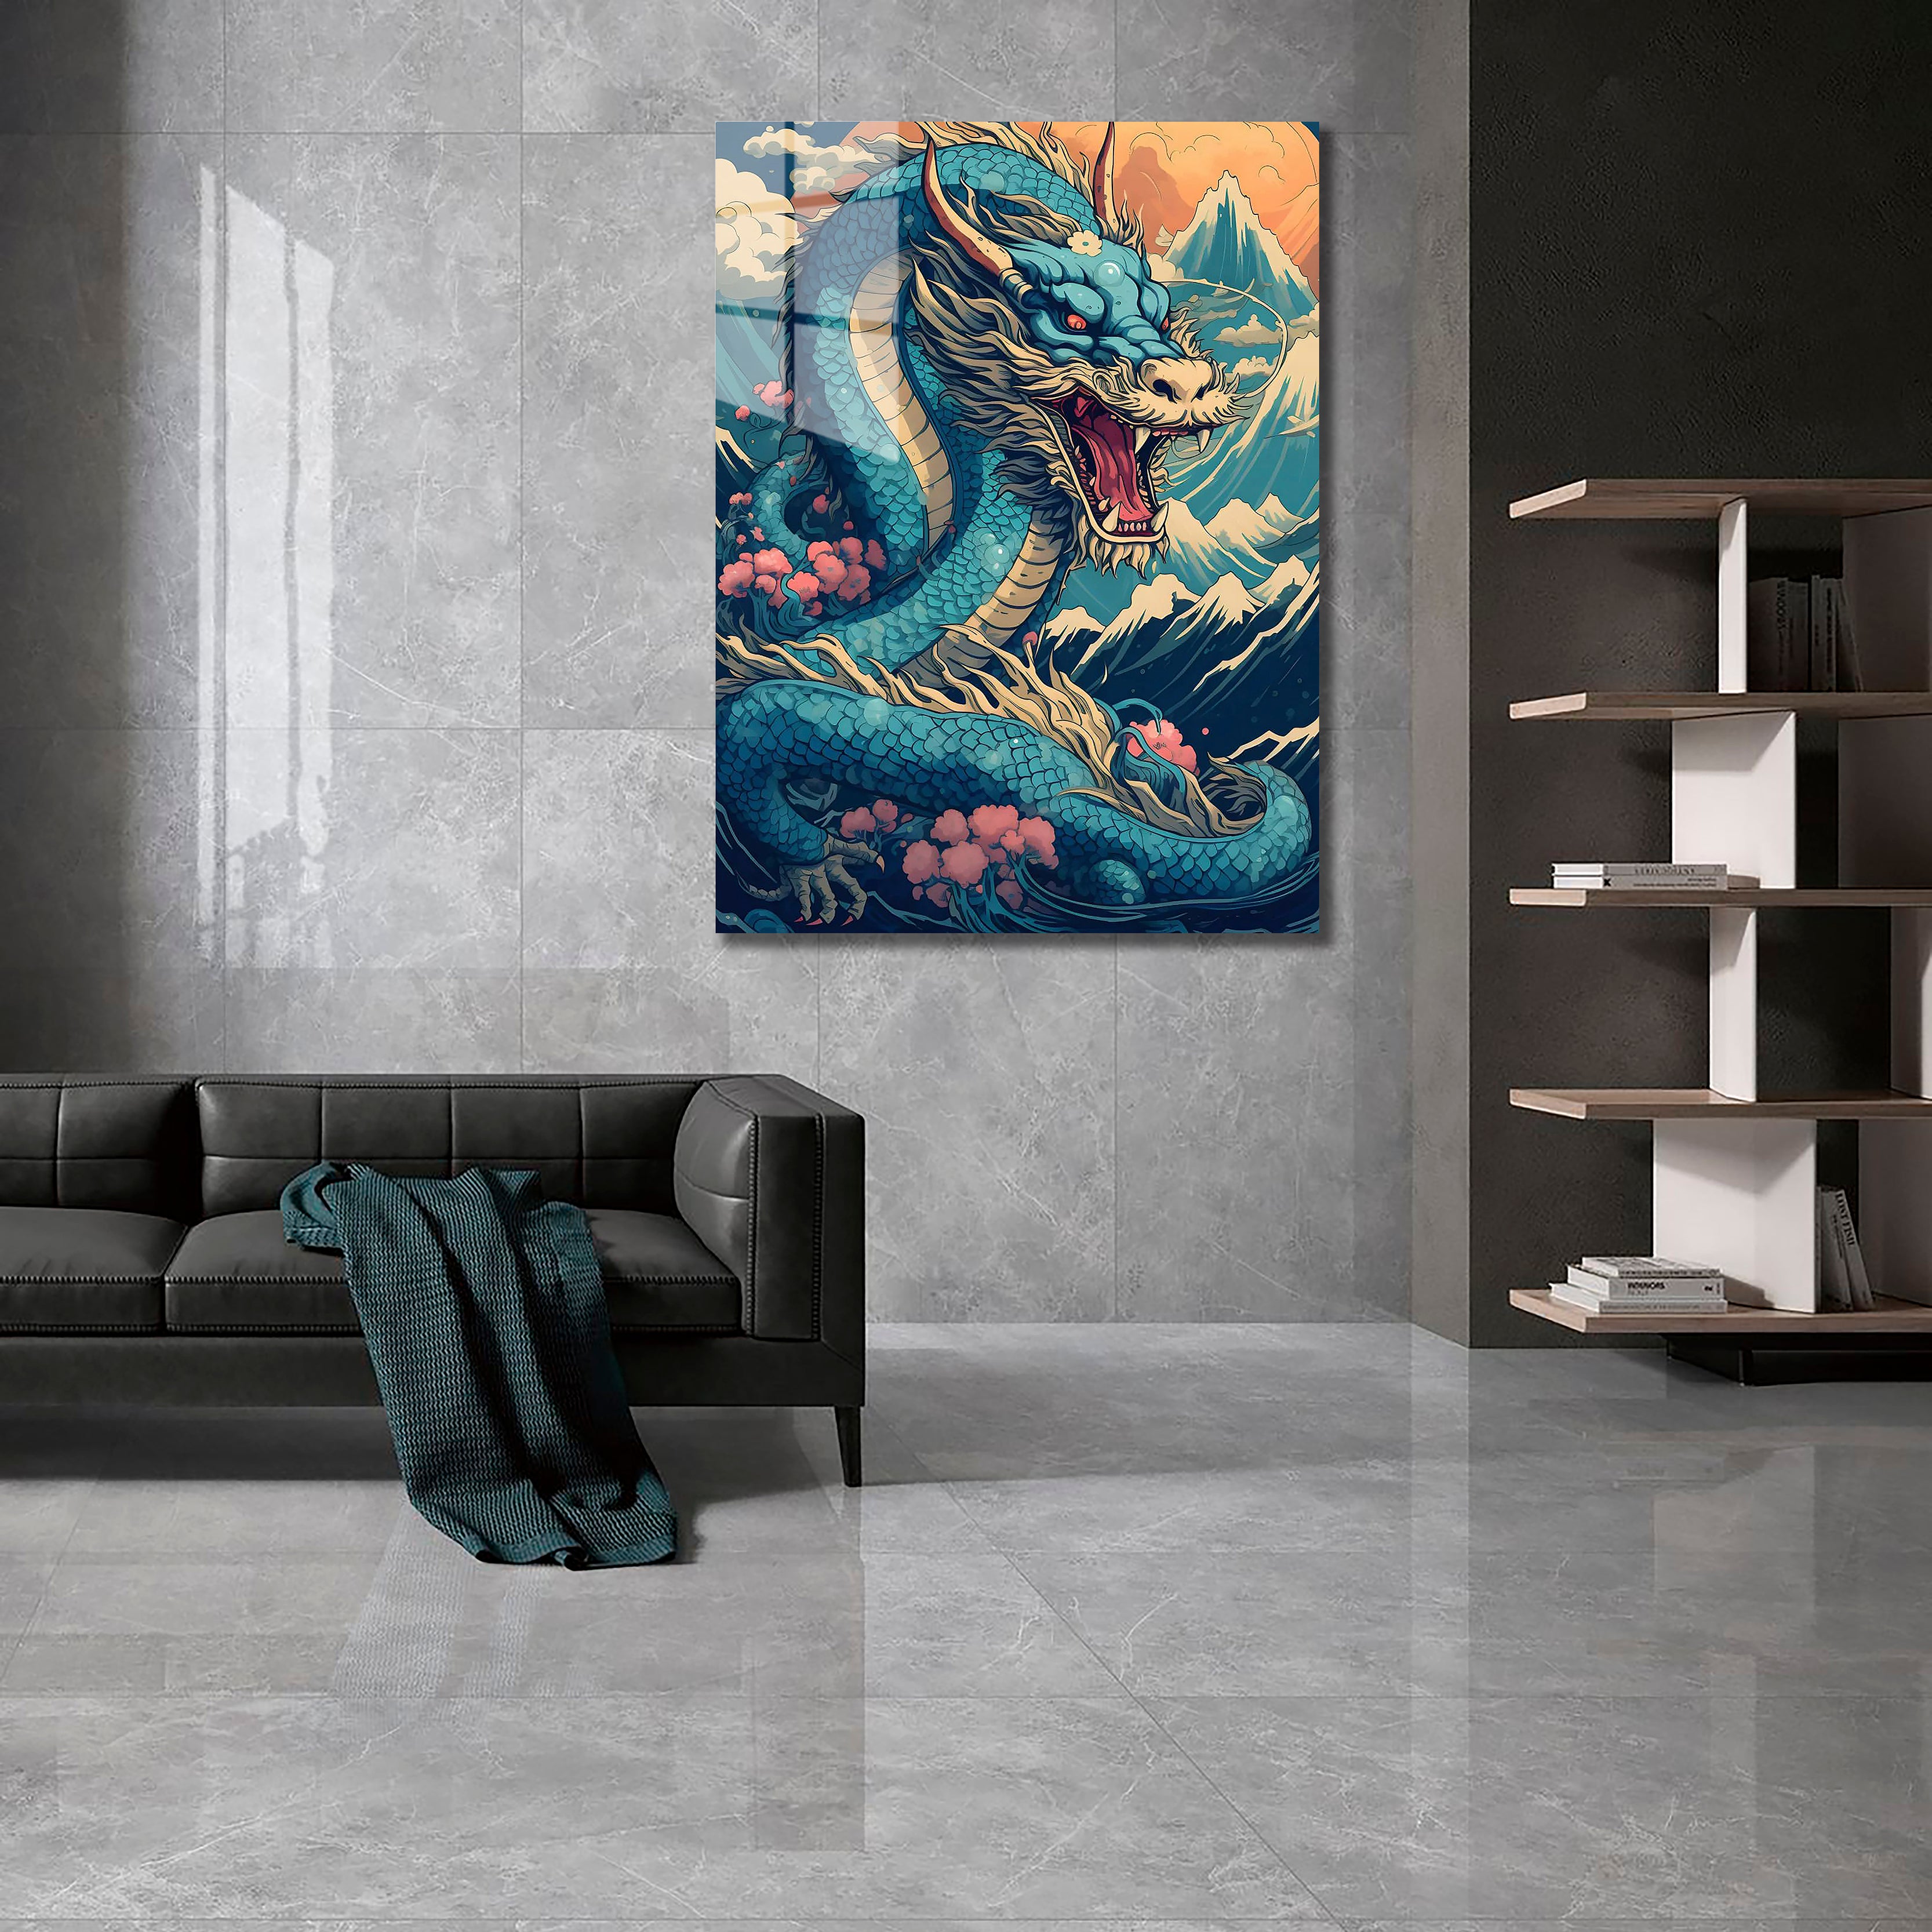 Waves and dragons-designed by @Artsopolis